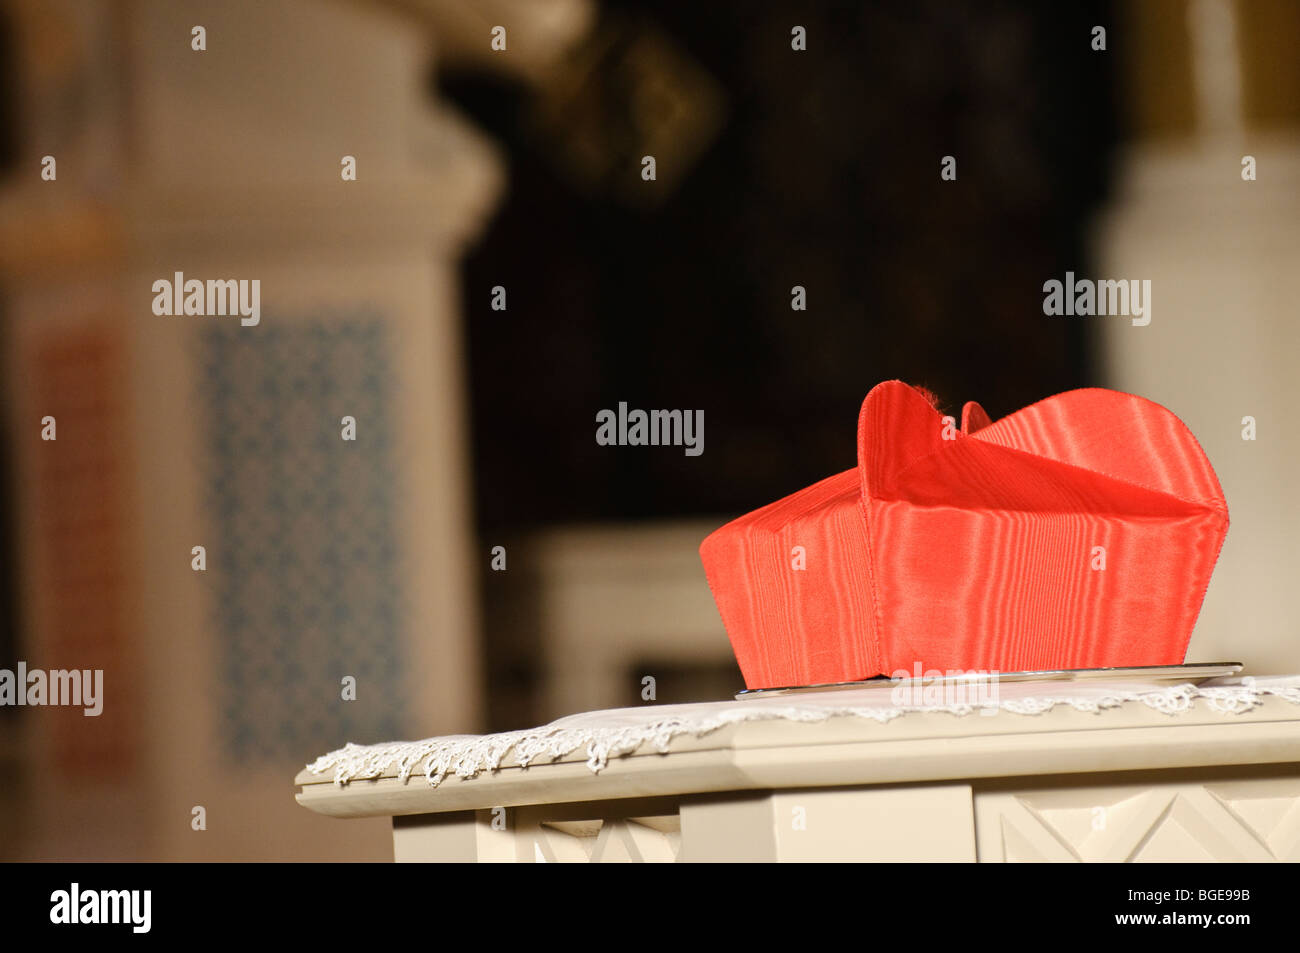 A cardinal's Biretta hat sits on a table during a requiem mass Stock Photo